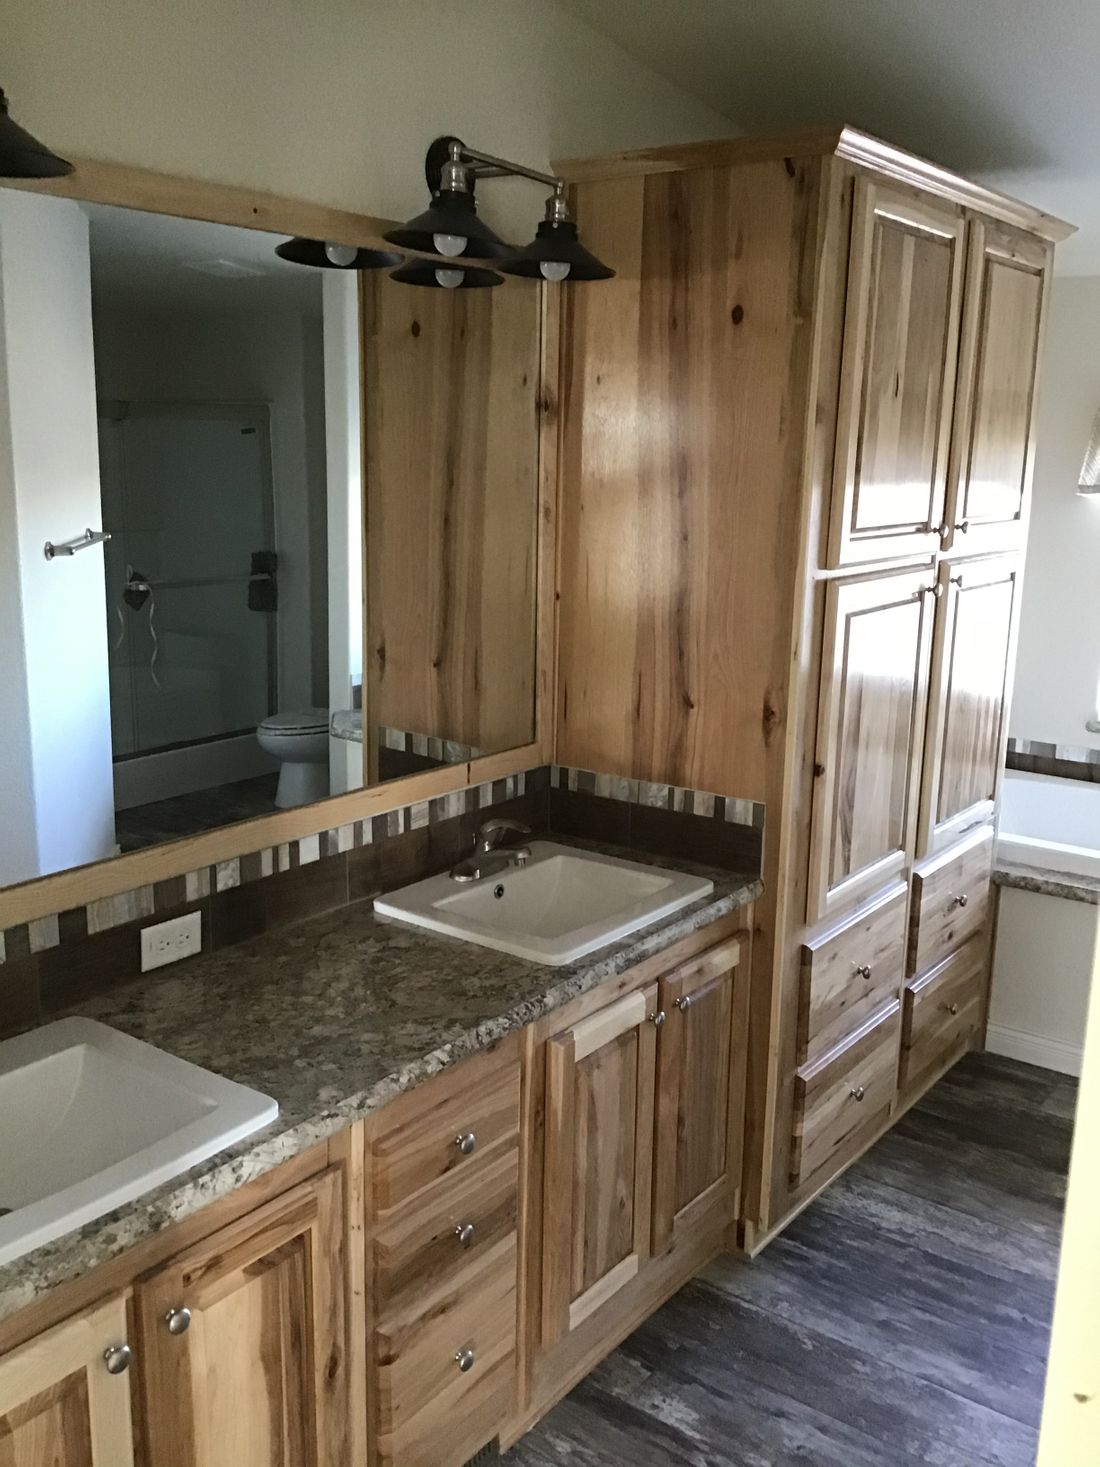 The 9596S RAINIER Primary Bathroom. This Manufactured Mobile Home features 3 bedrooms and 2 baths.